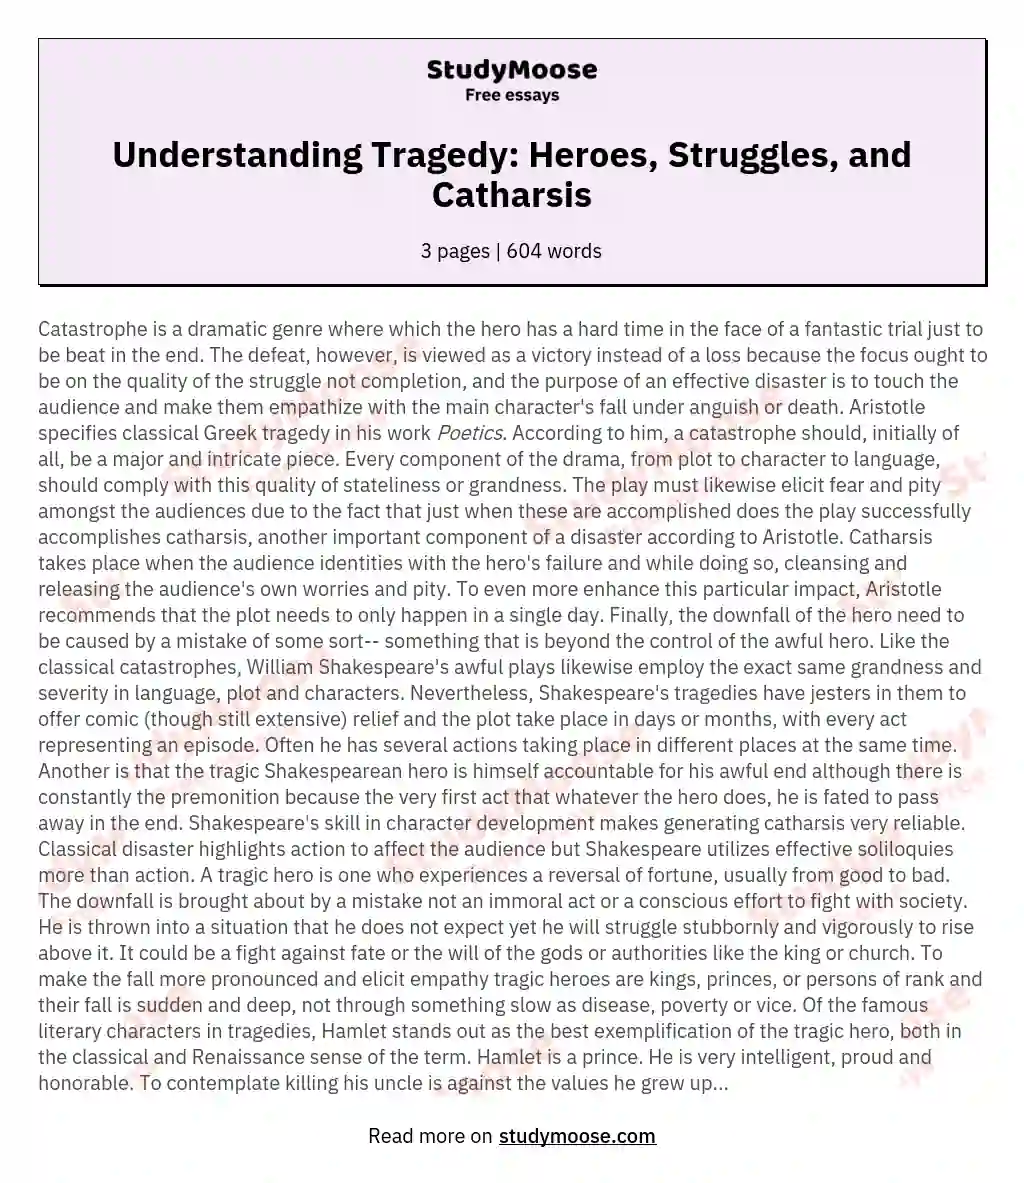 Understanding Tragedy: Heroes, Struggles, and Catharsis essay